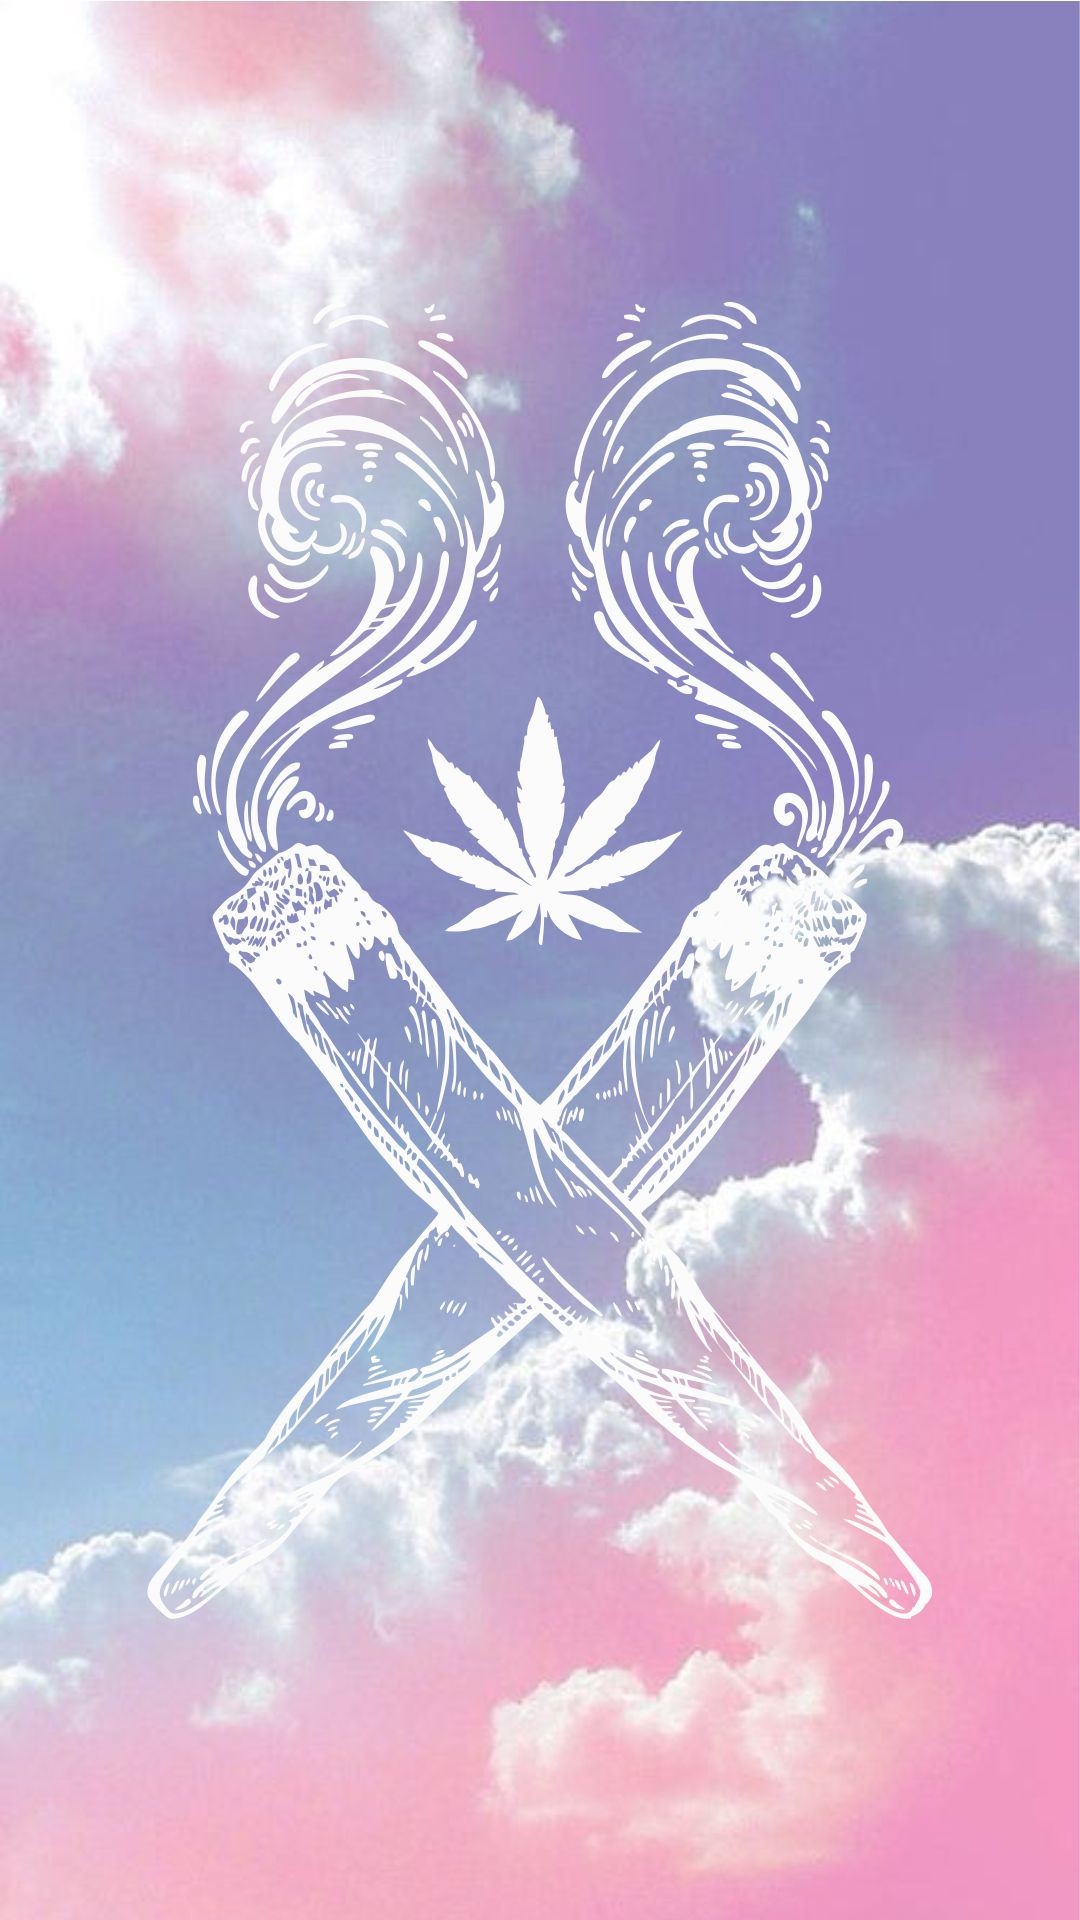 Stoner Wallpaper iPhone (52+ images)